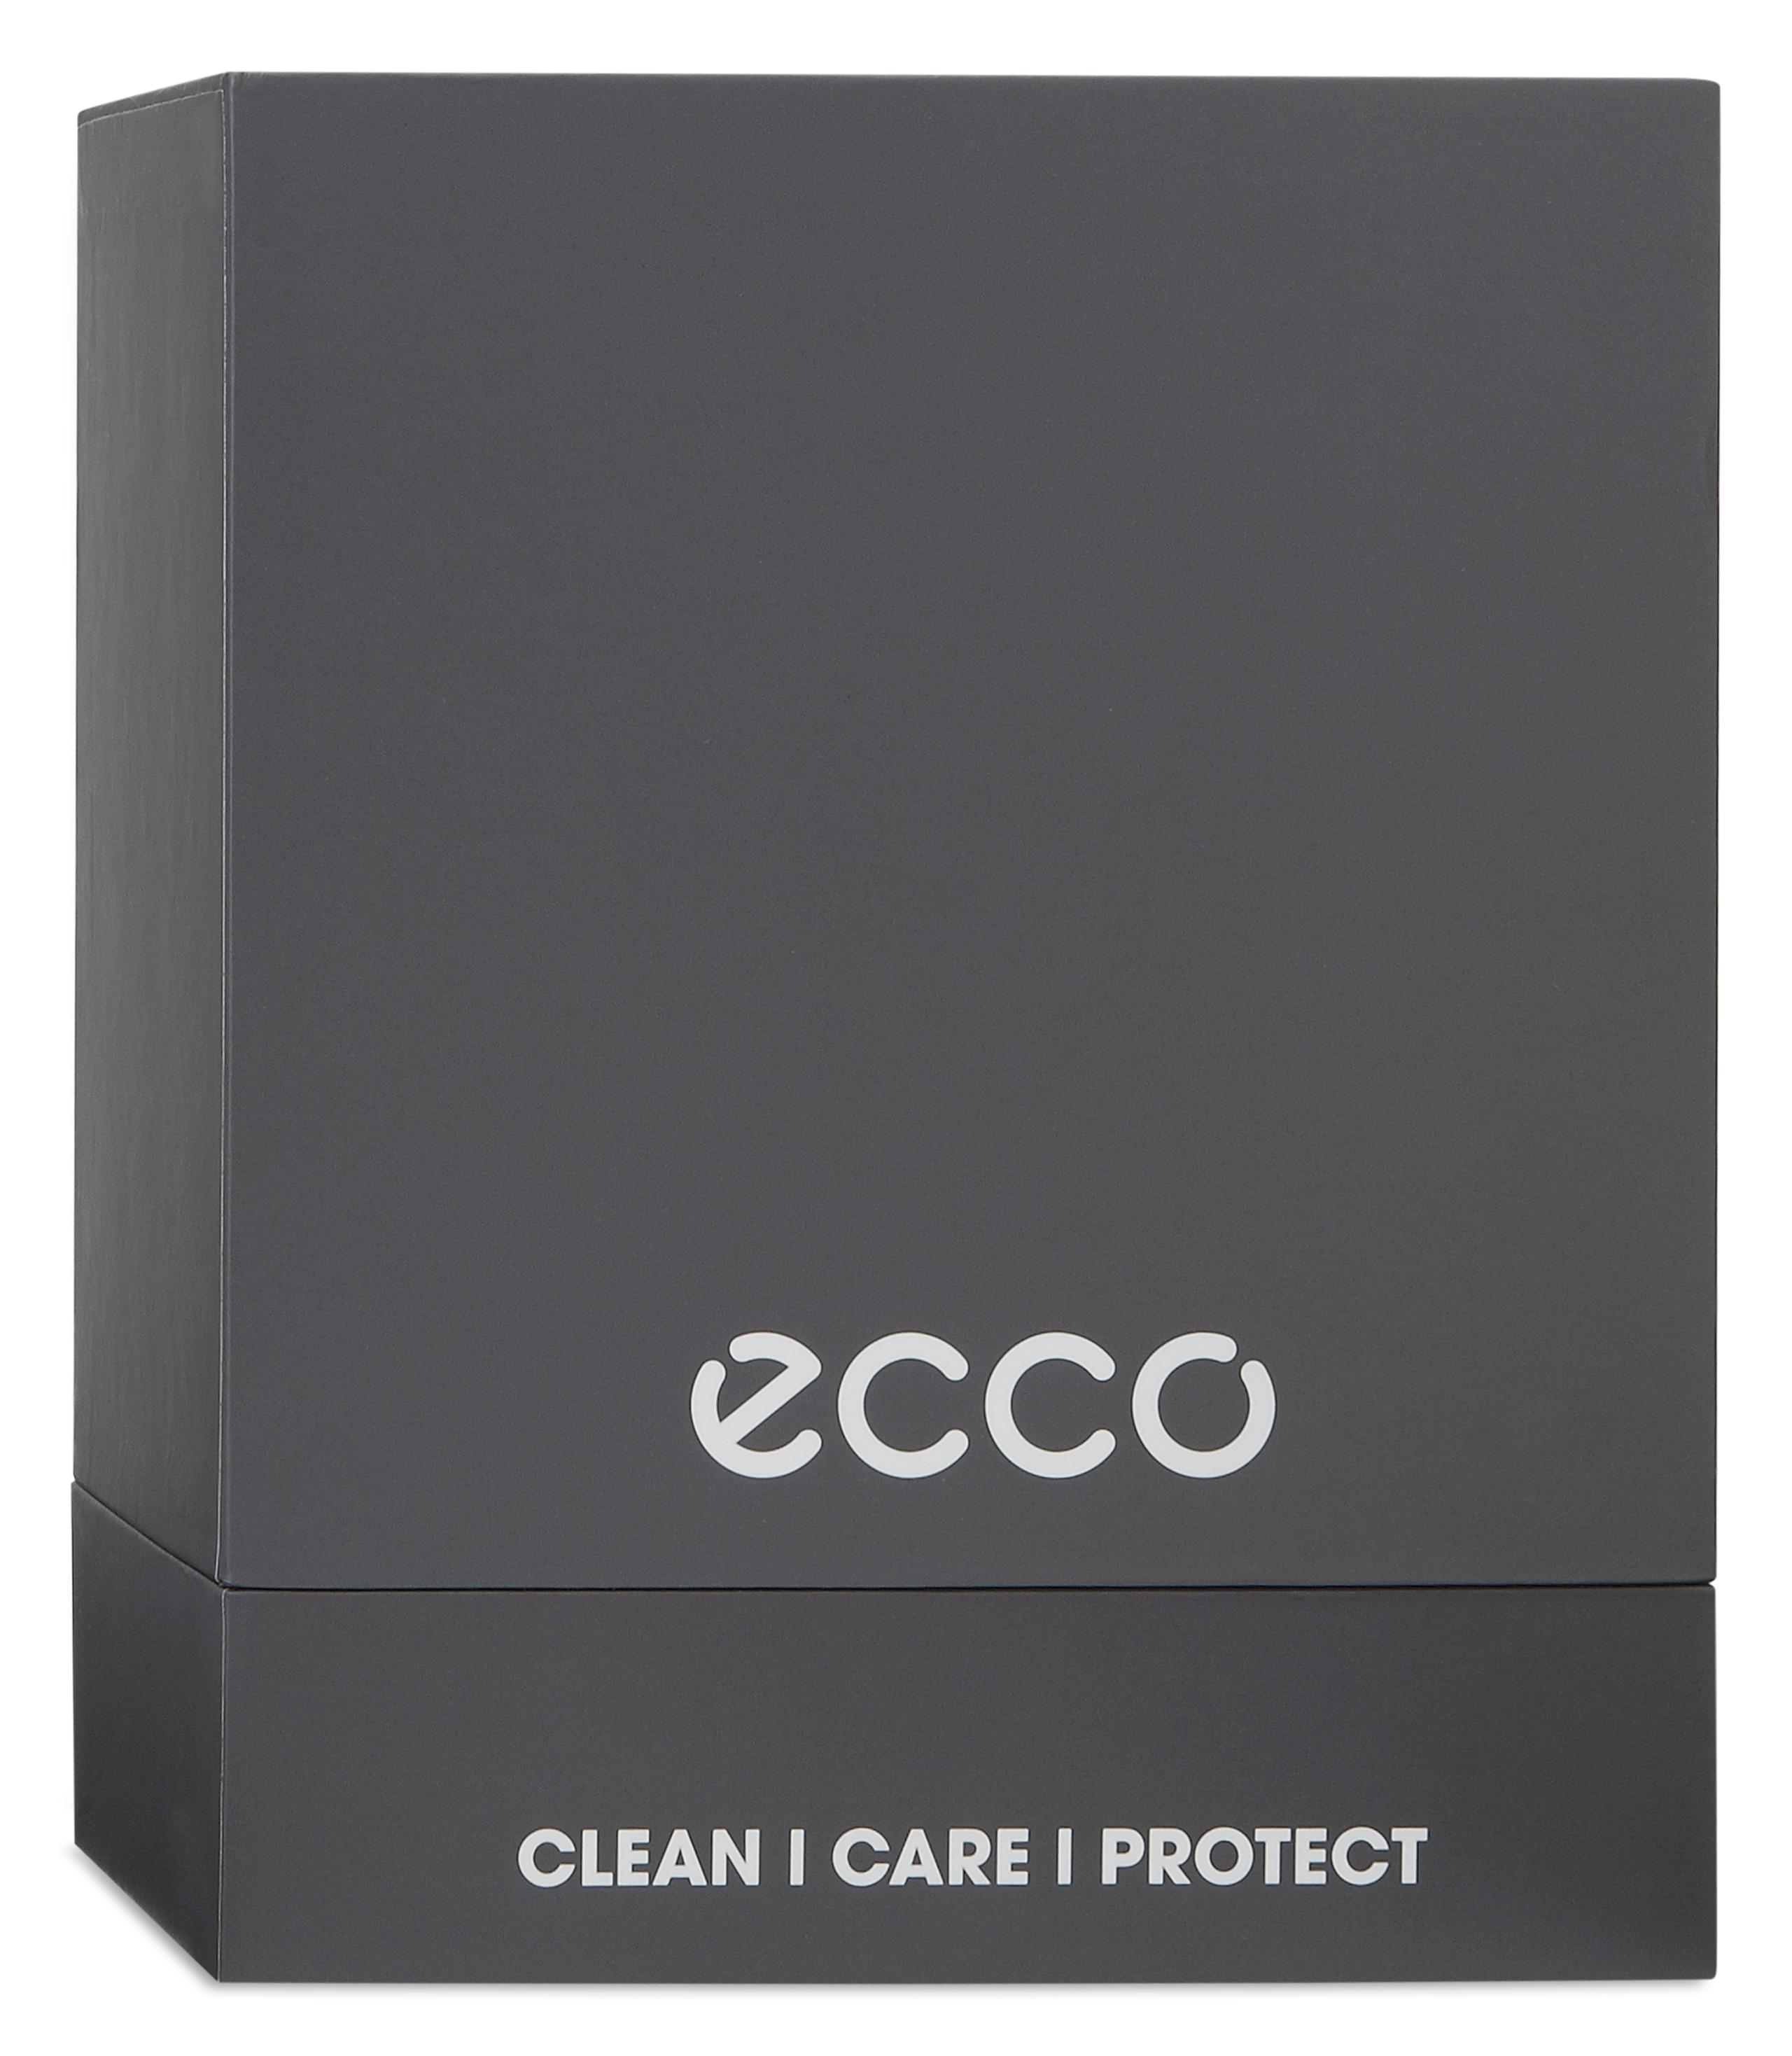 ecco shoe cleaning kit